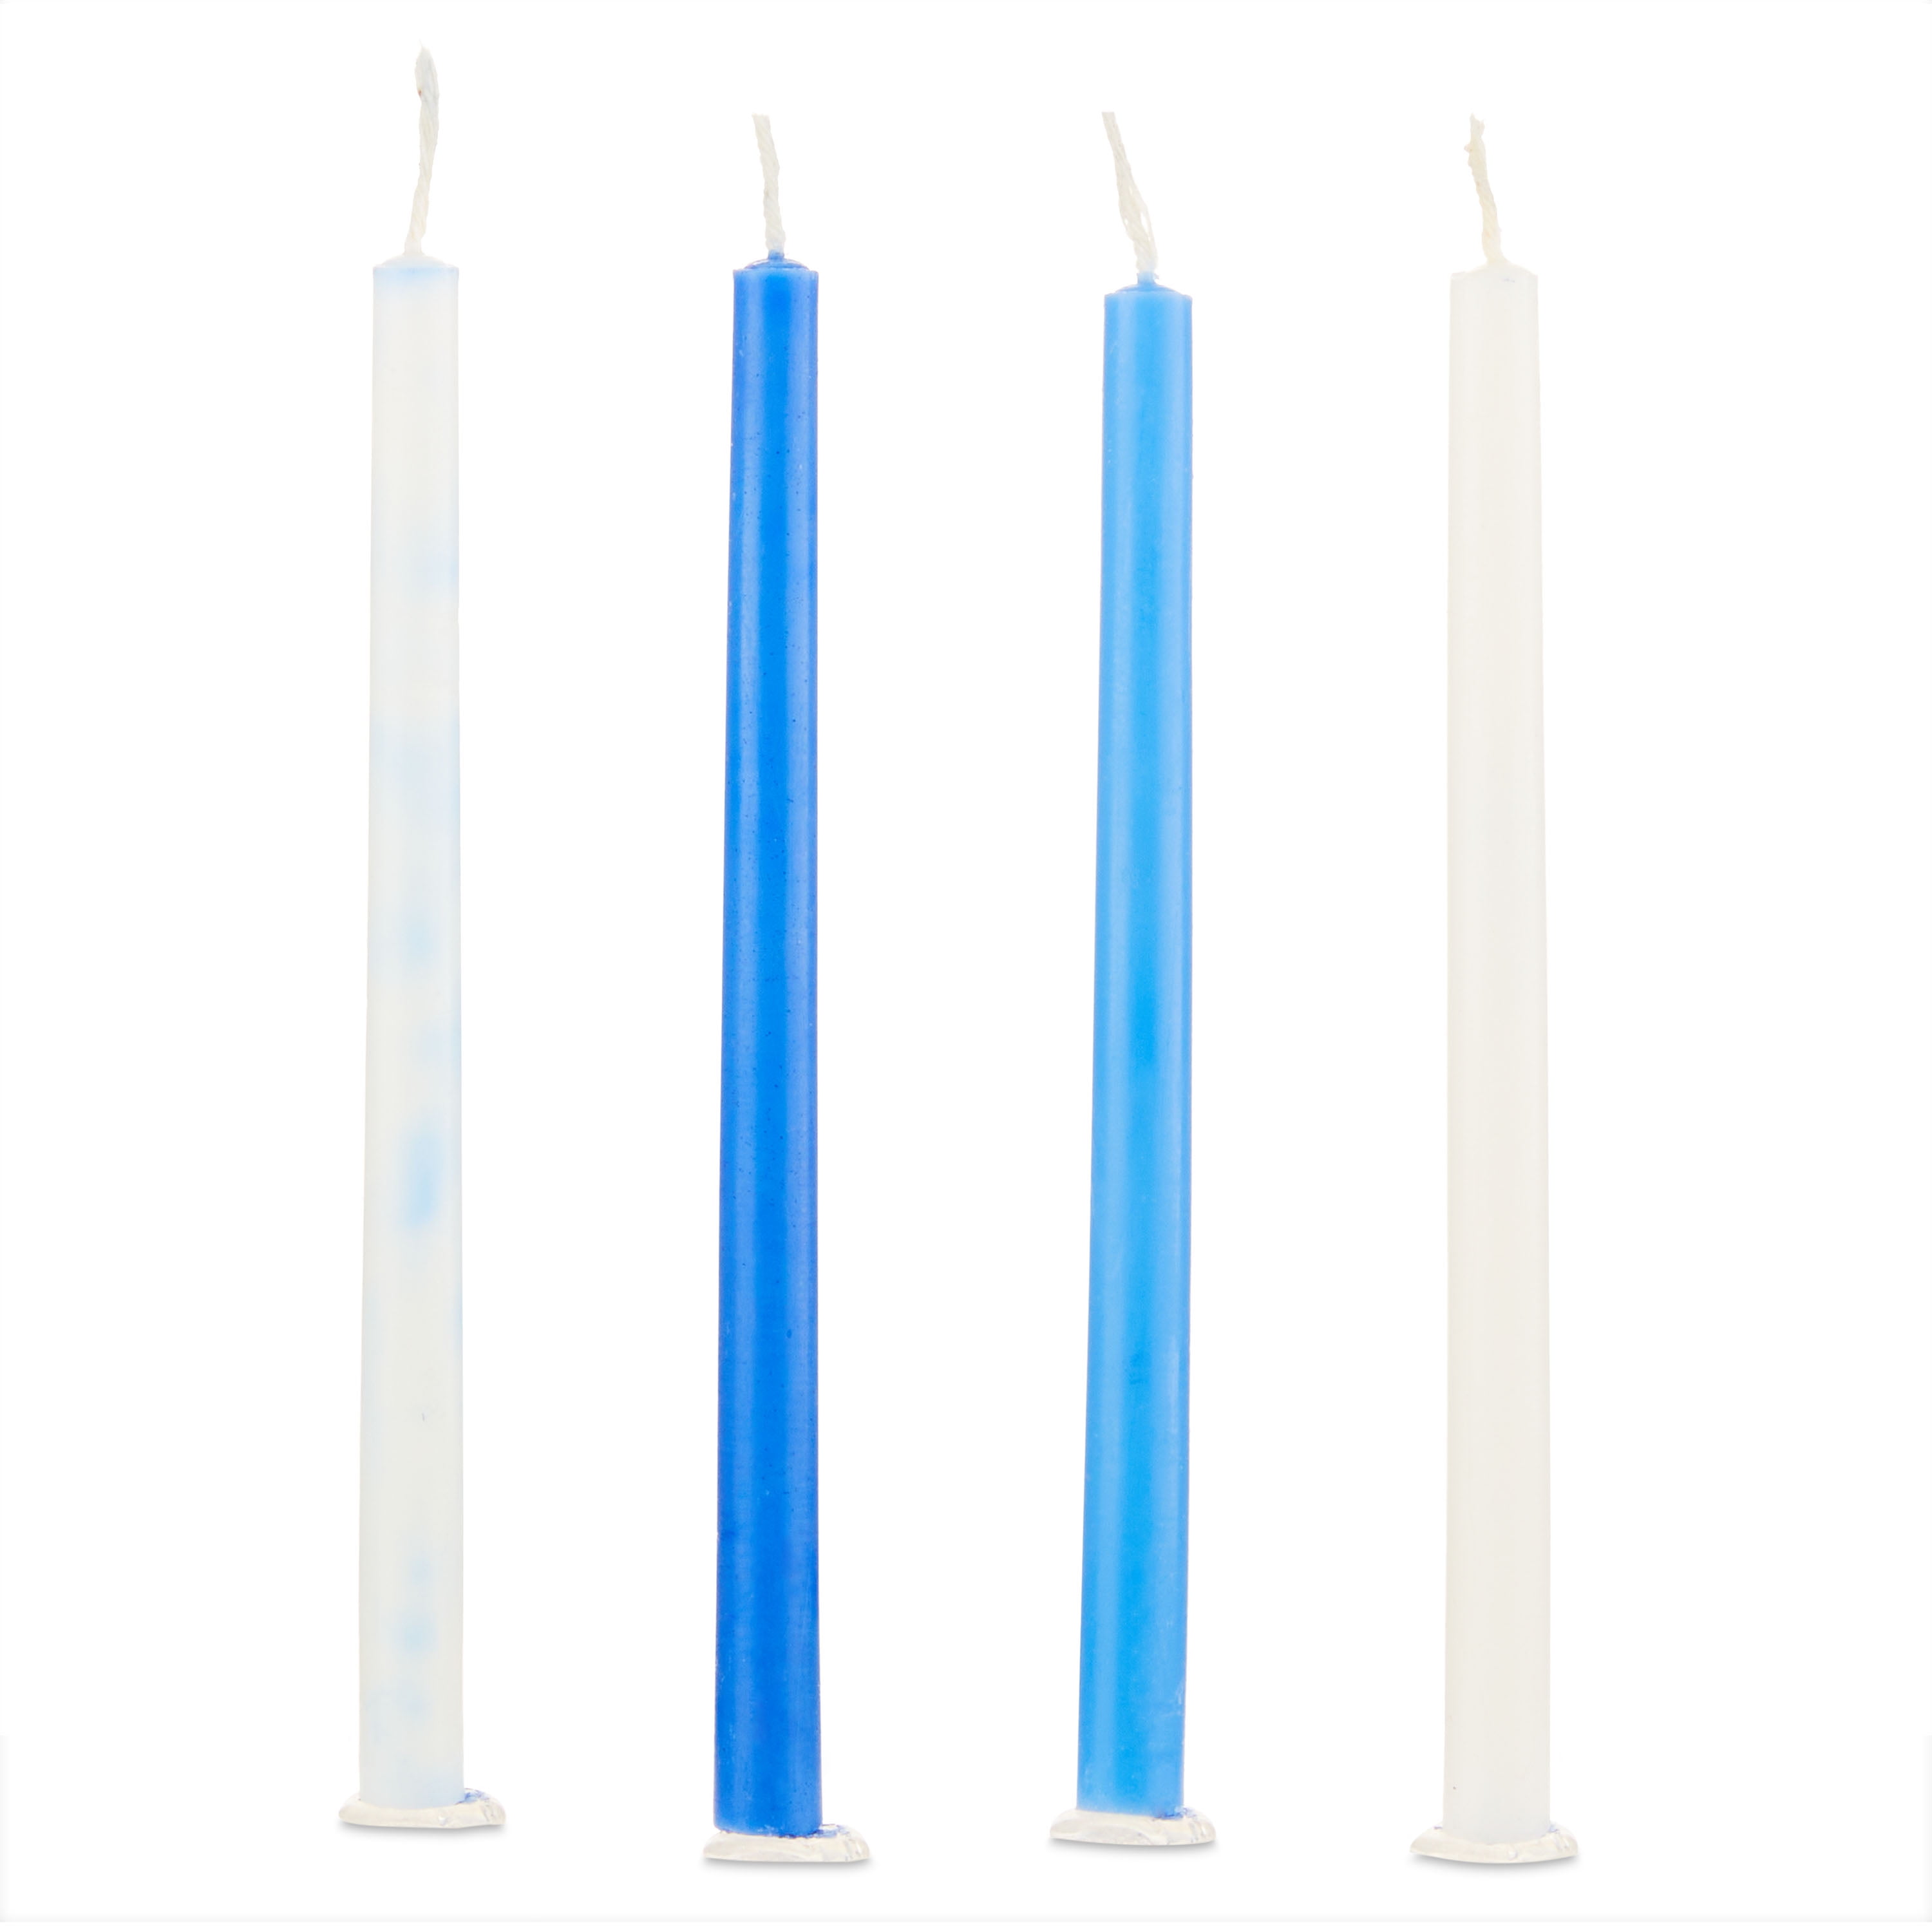 Deluxe Chanukah Candles, Unscented - Blue & White